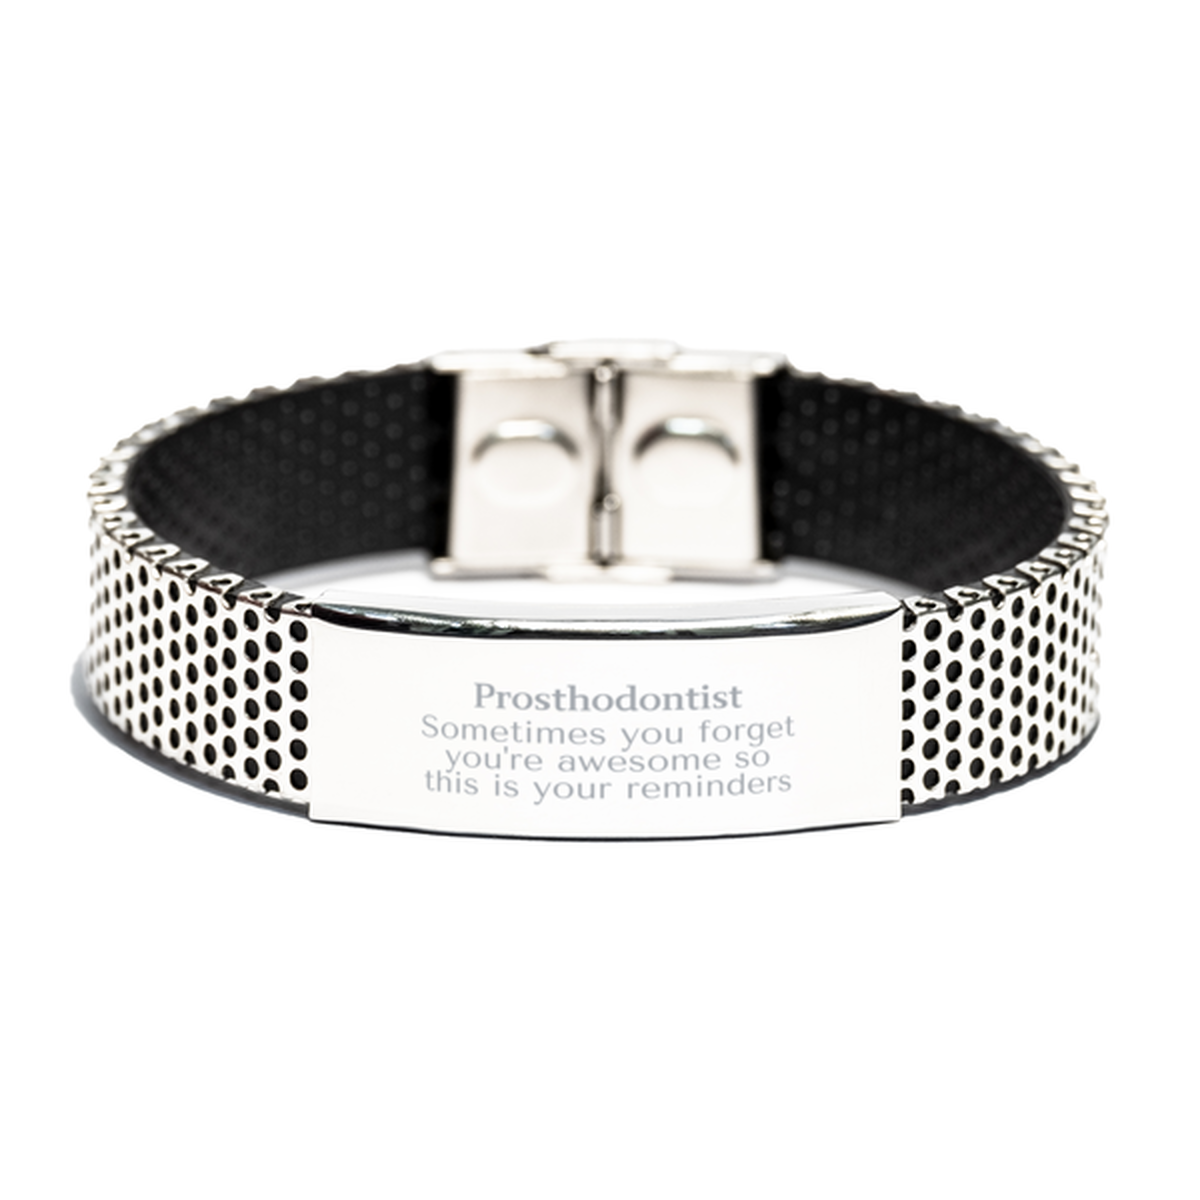 Sentimental Prosthodontist Stainless Steel Bracelet, Prosthodontist Sometimes you forget you're awesome so this is your reminders, Graduation Christmas Birthday Gifts for Prosthodontist, Men, Women, Coworkers